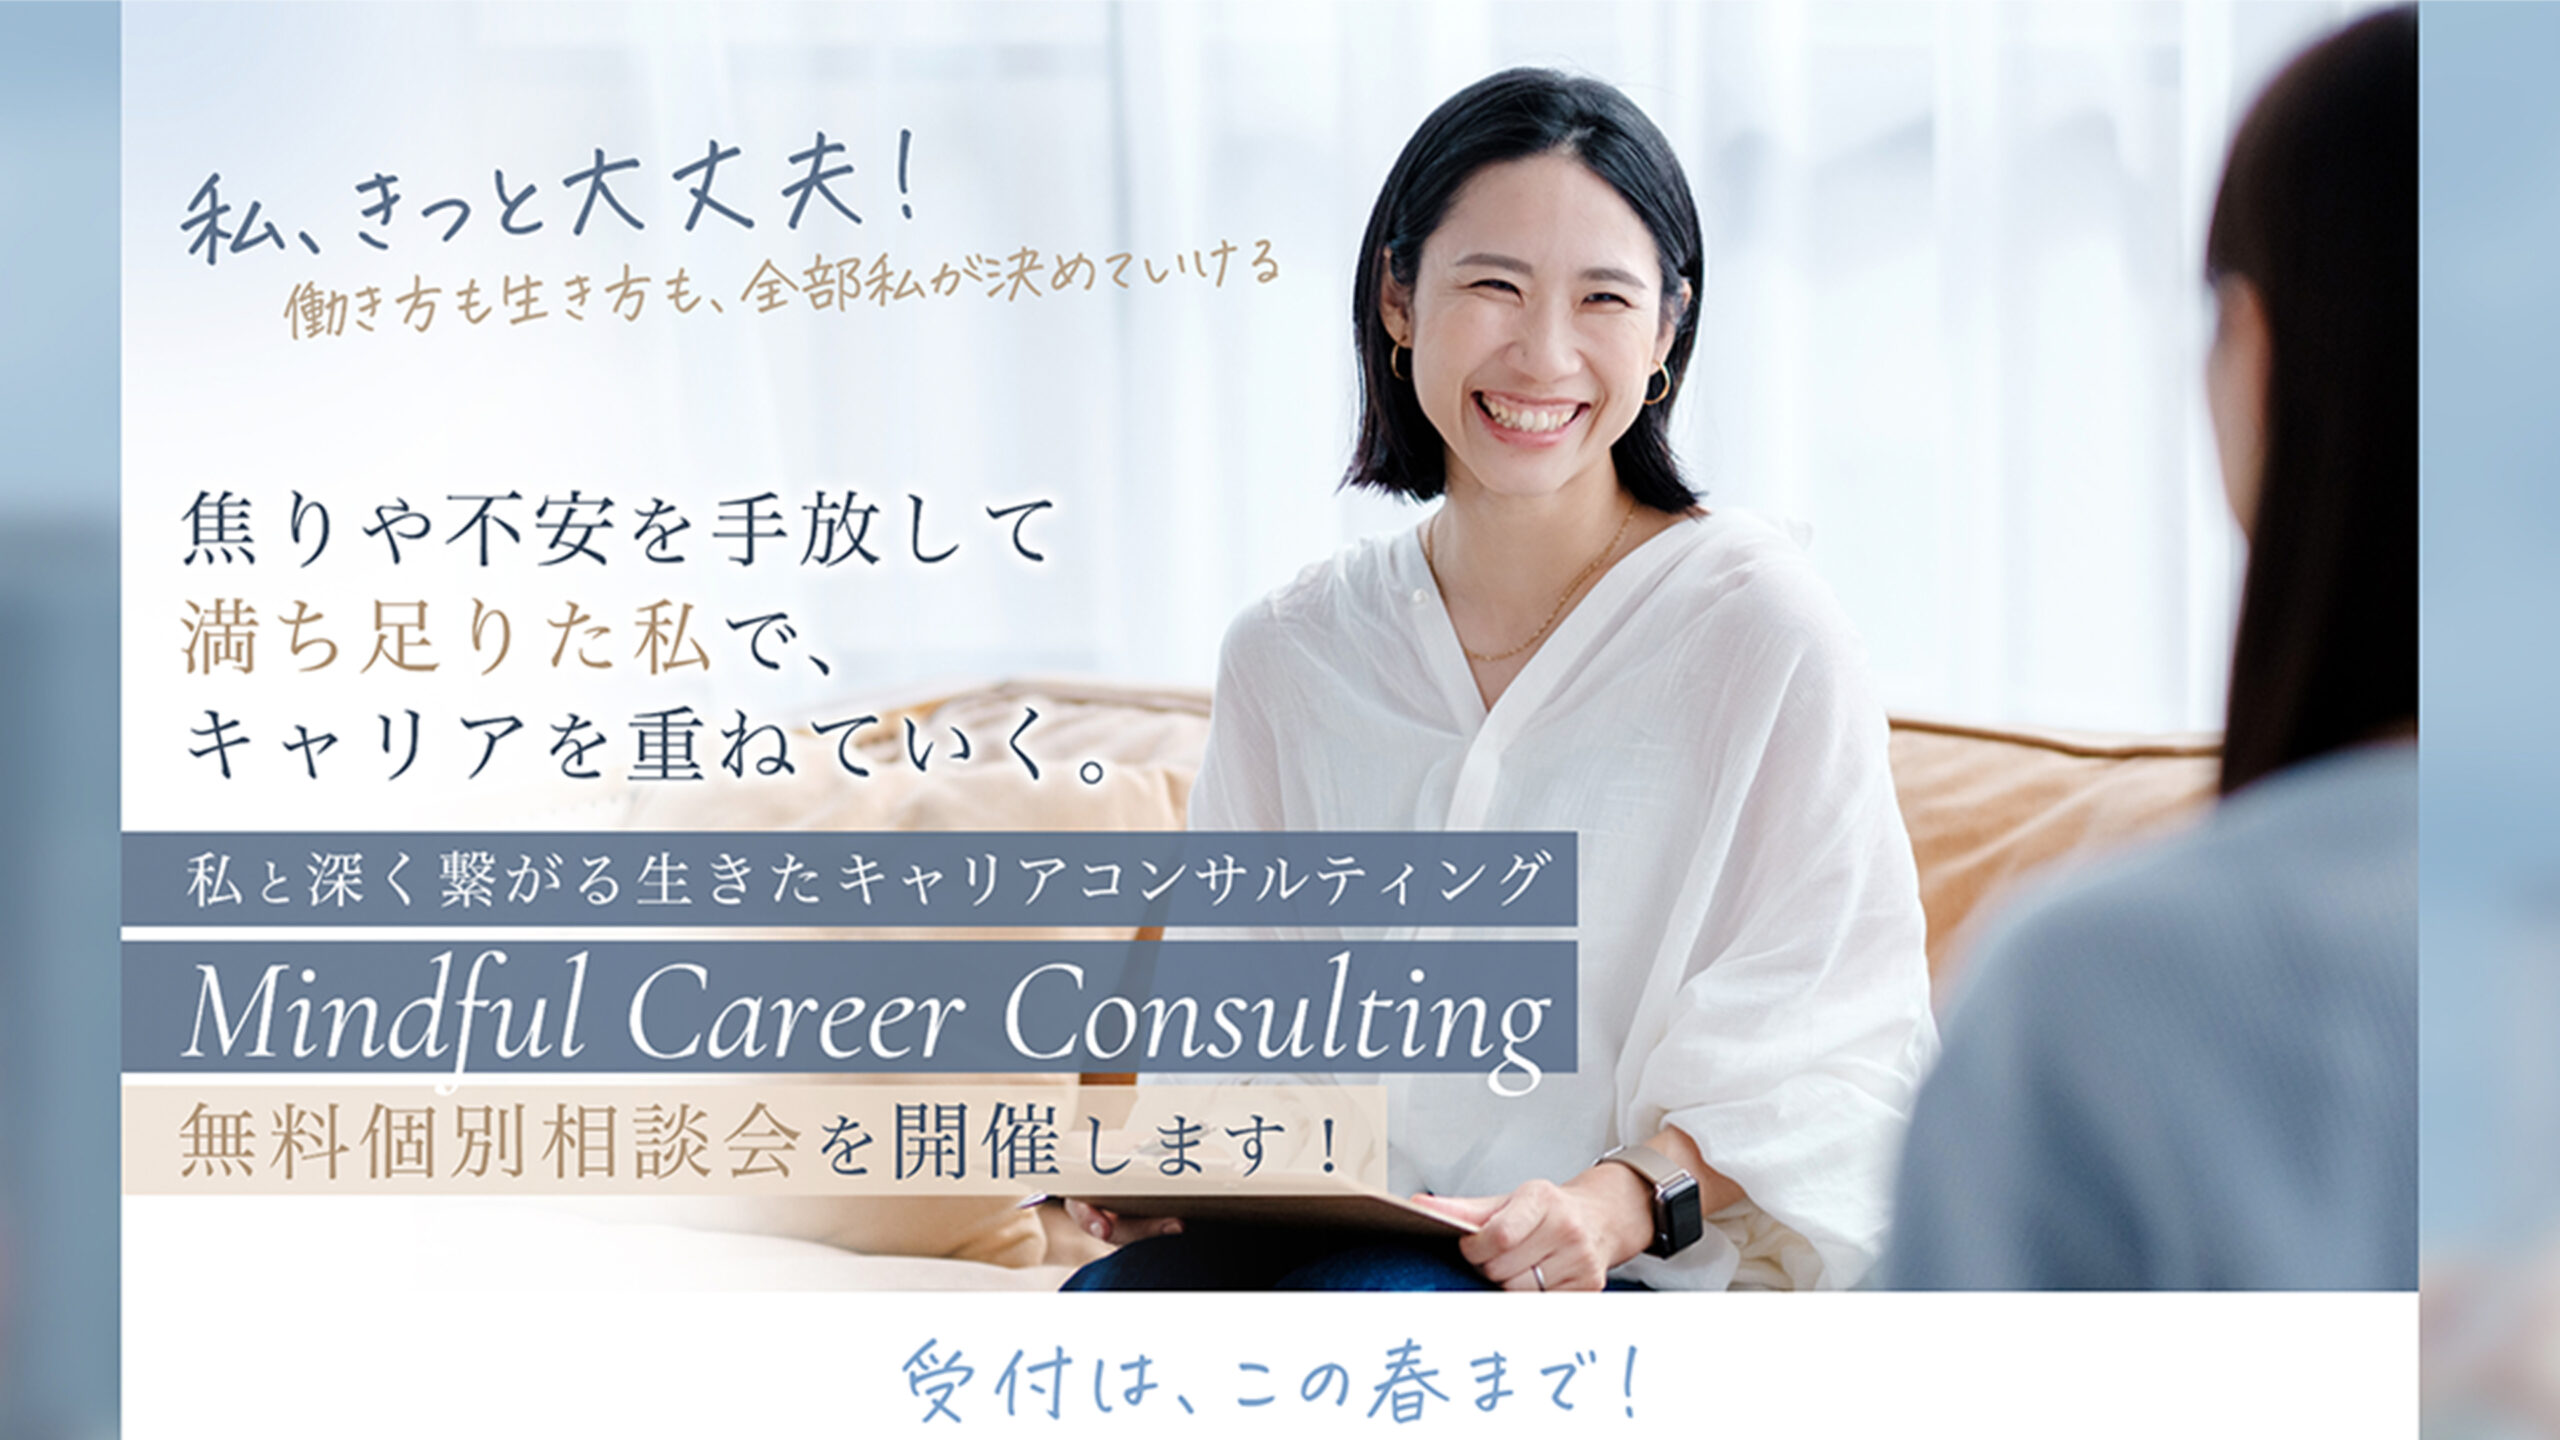 Mindful Career Consulting 大門麻友子 様